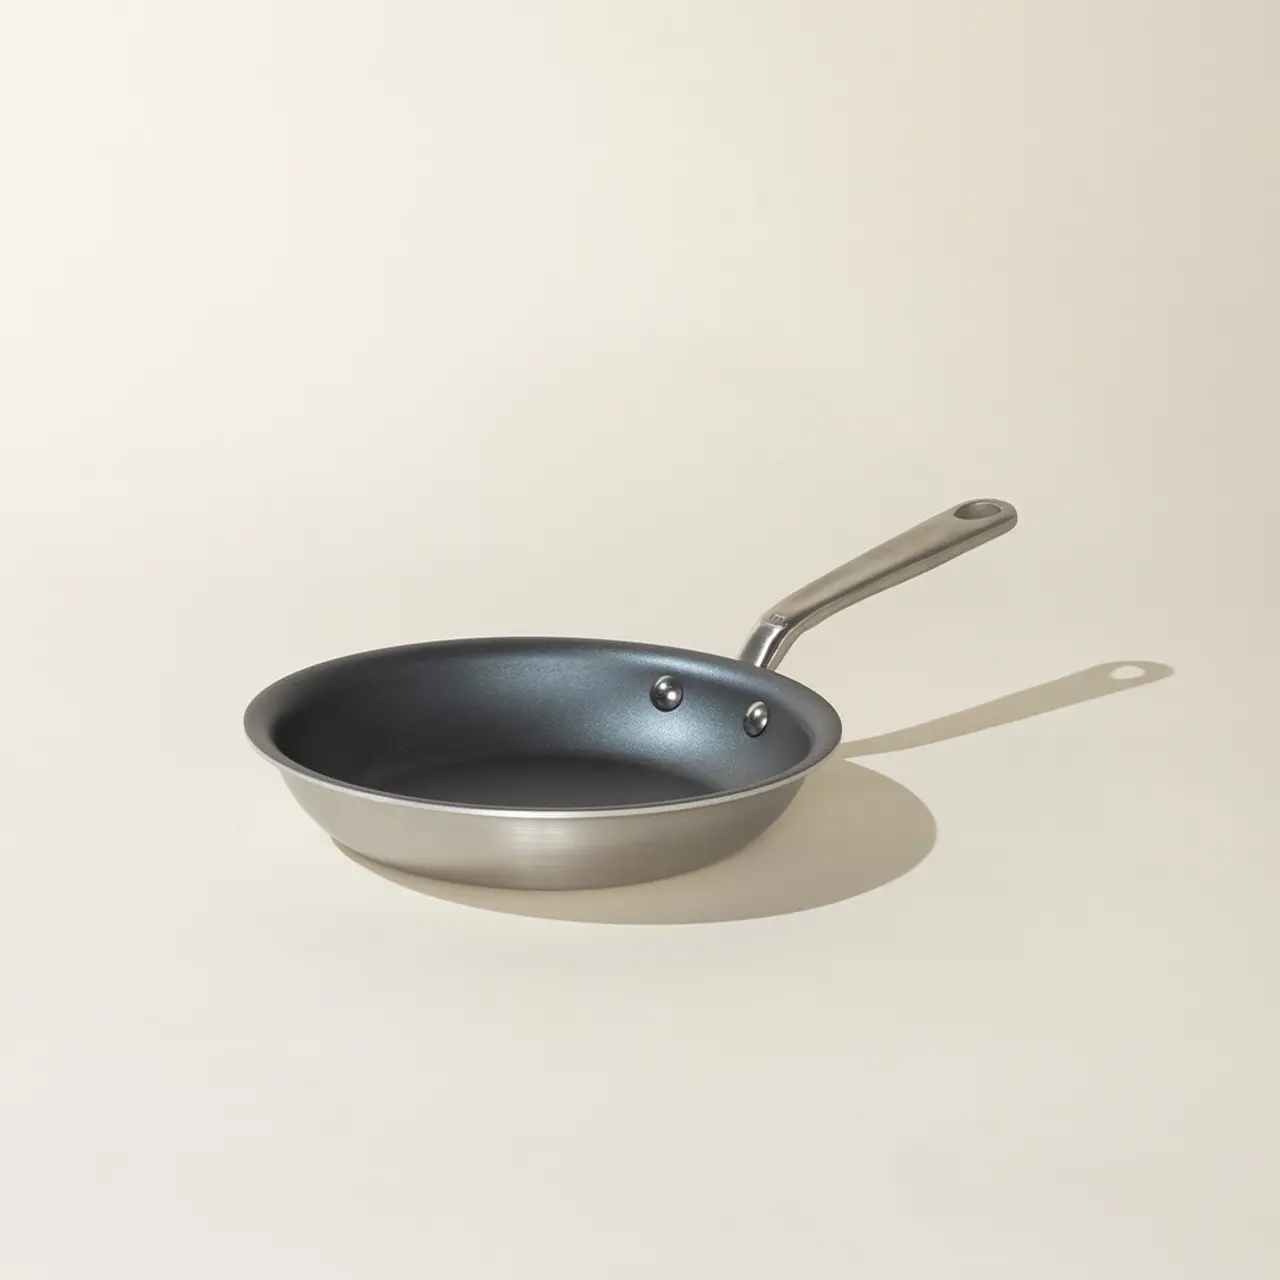 A stainless steel frying pan with a non-stick coating is casting a shadow on a light surface.